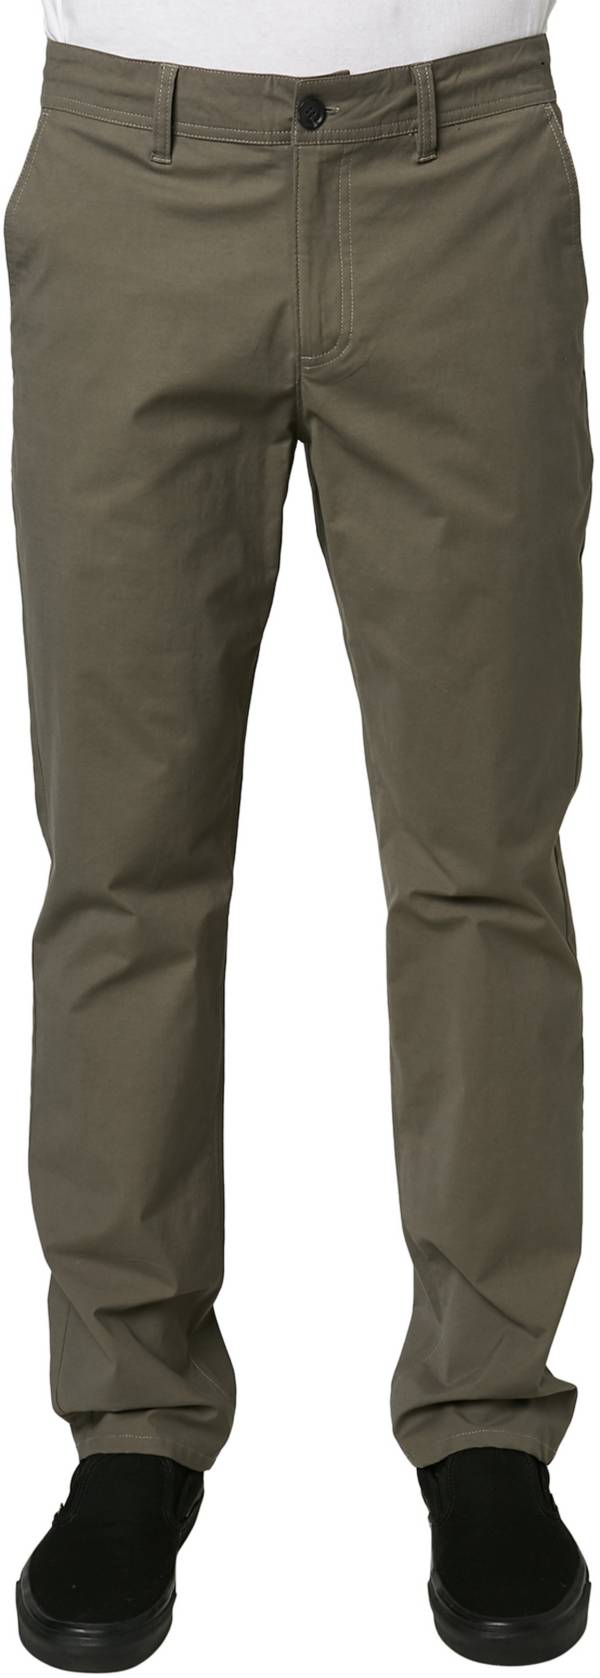 O'Neill Men's Mission Hybrid Chino Pants product image